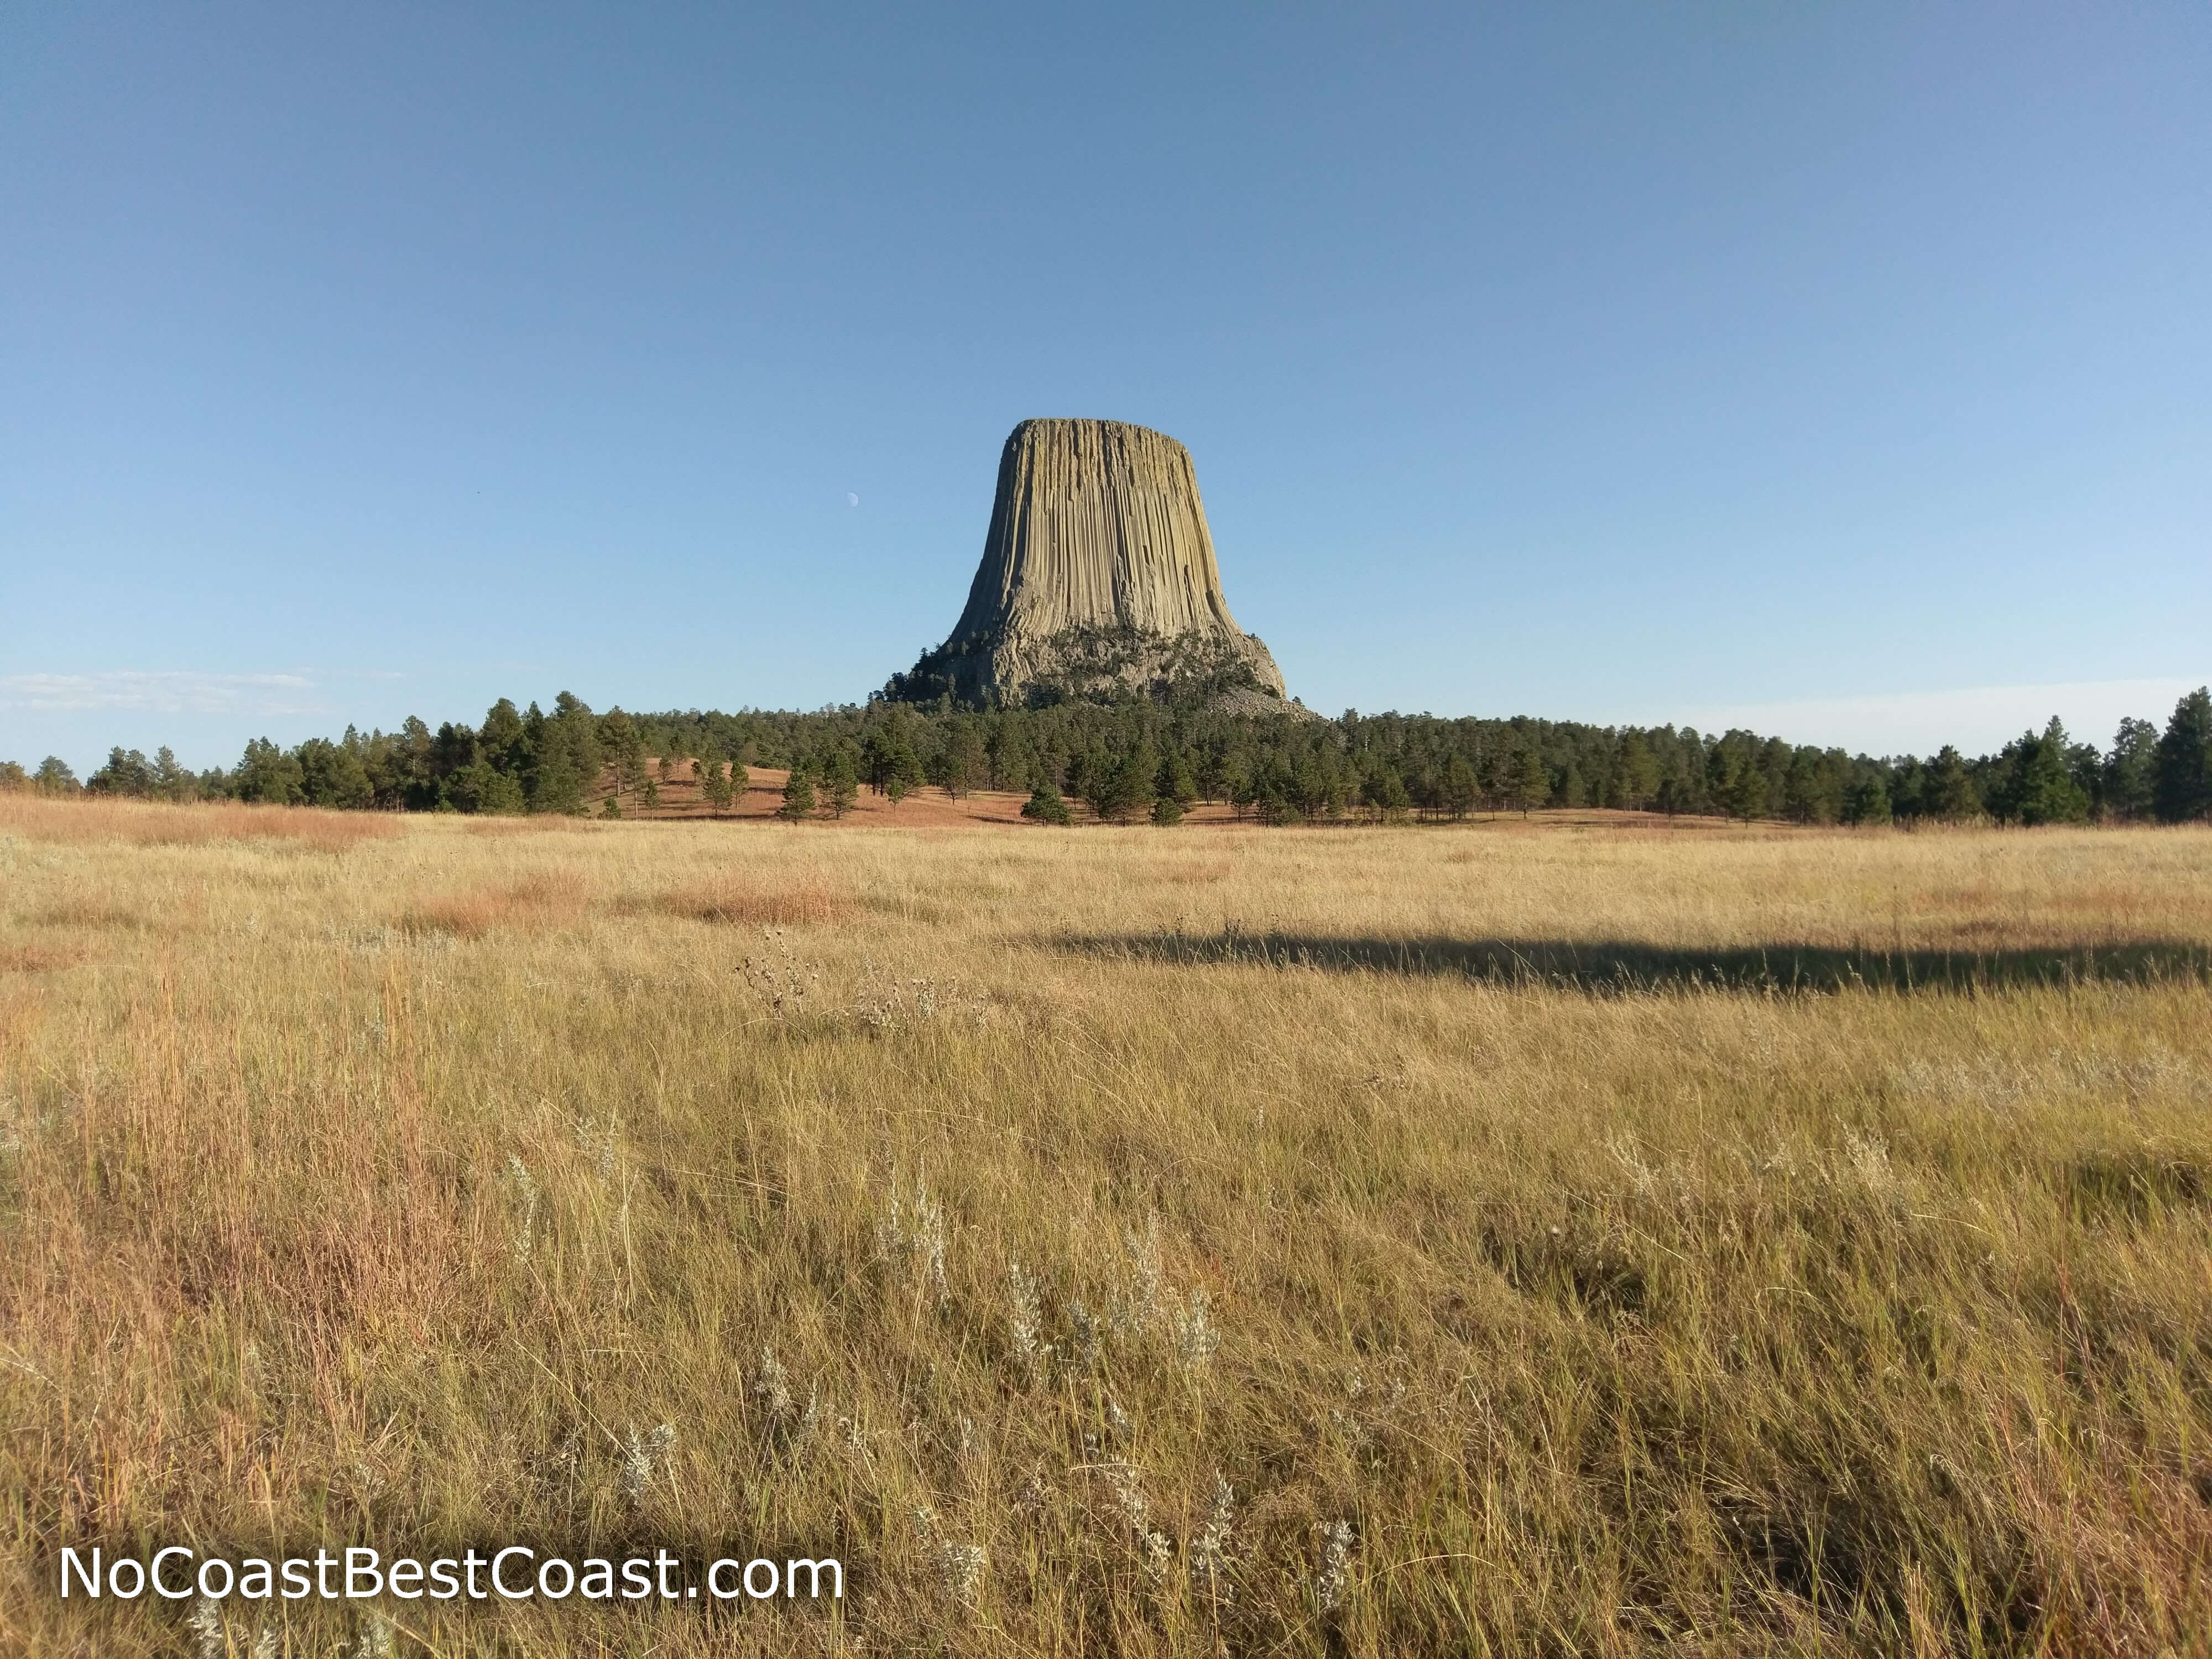 Joyner Ridge gives the best views of Devils Tower from a distance